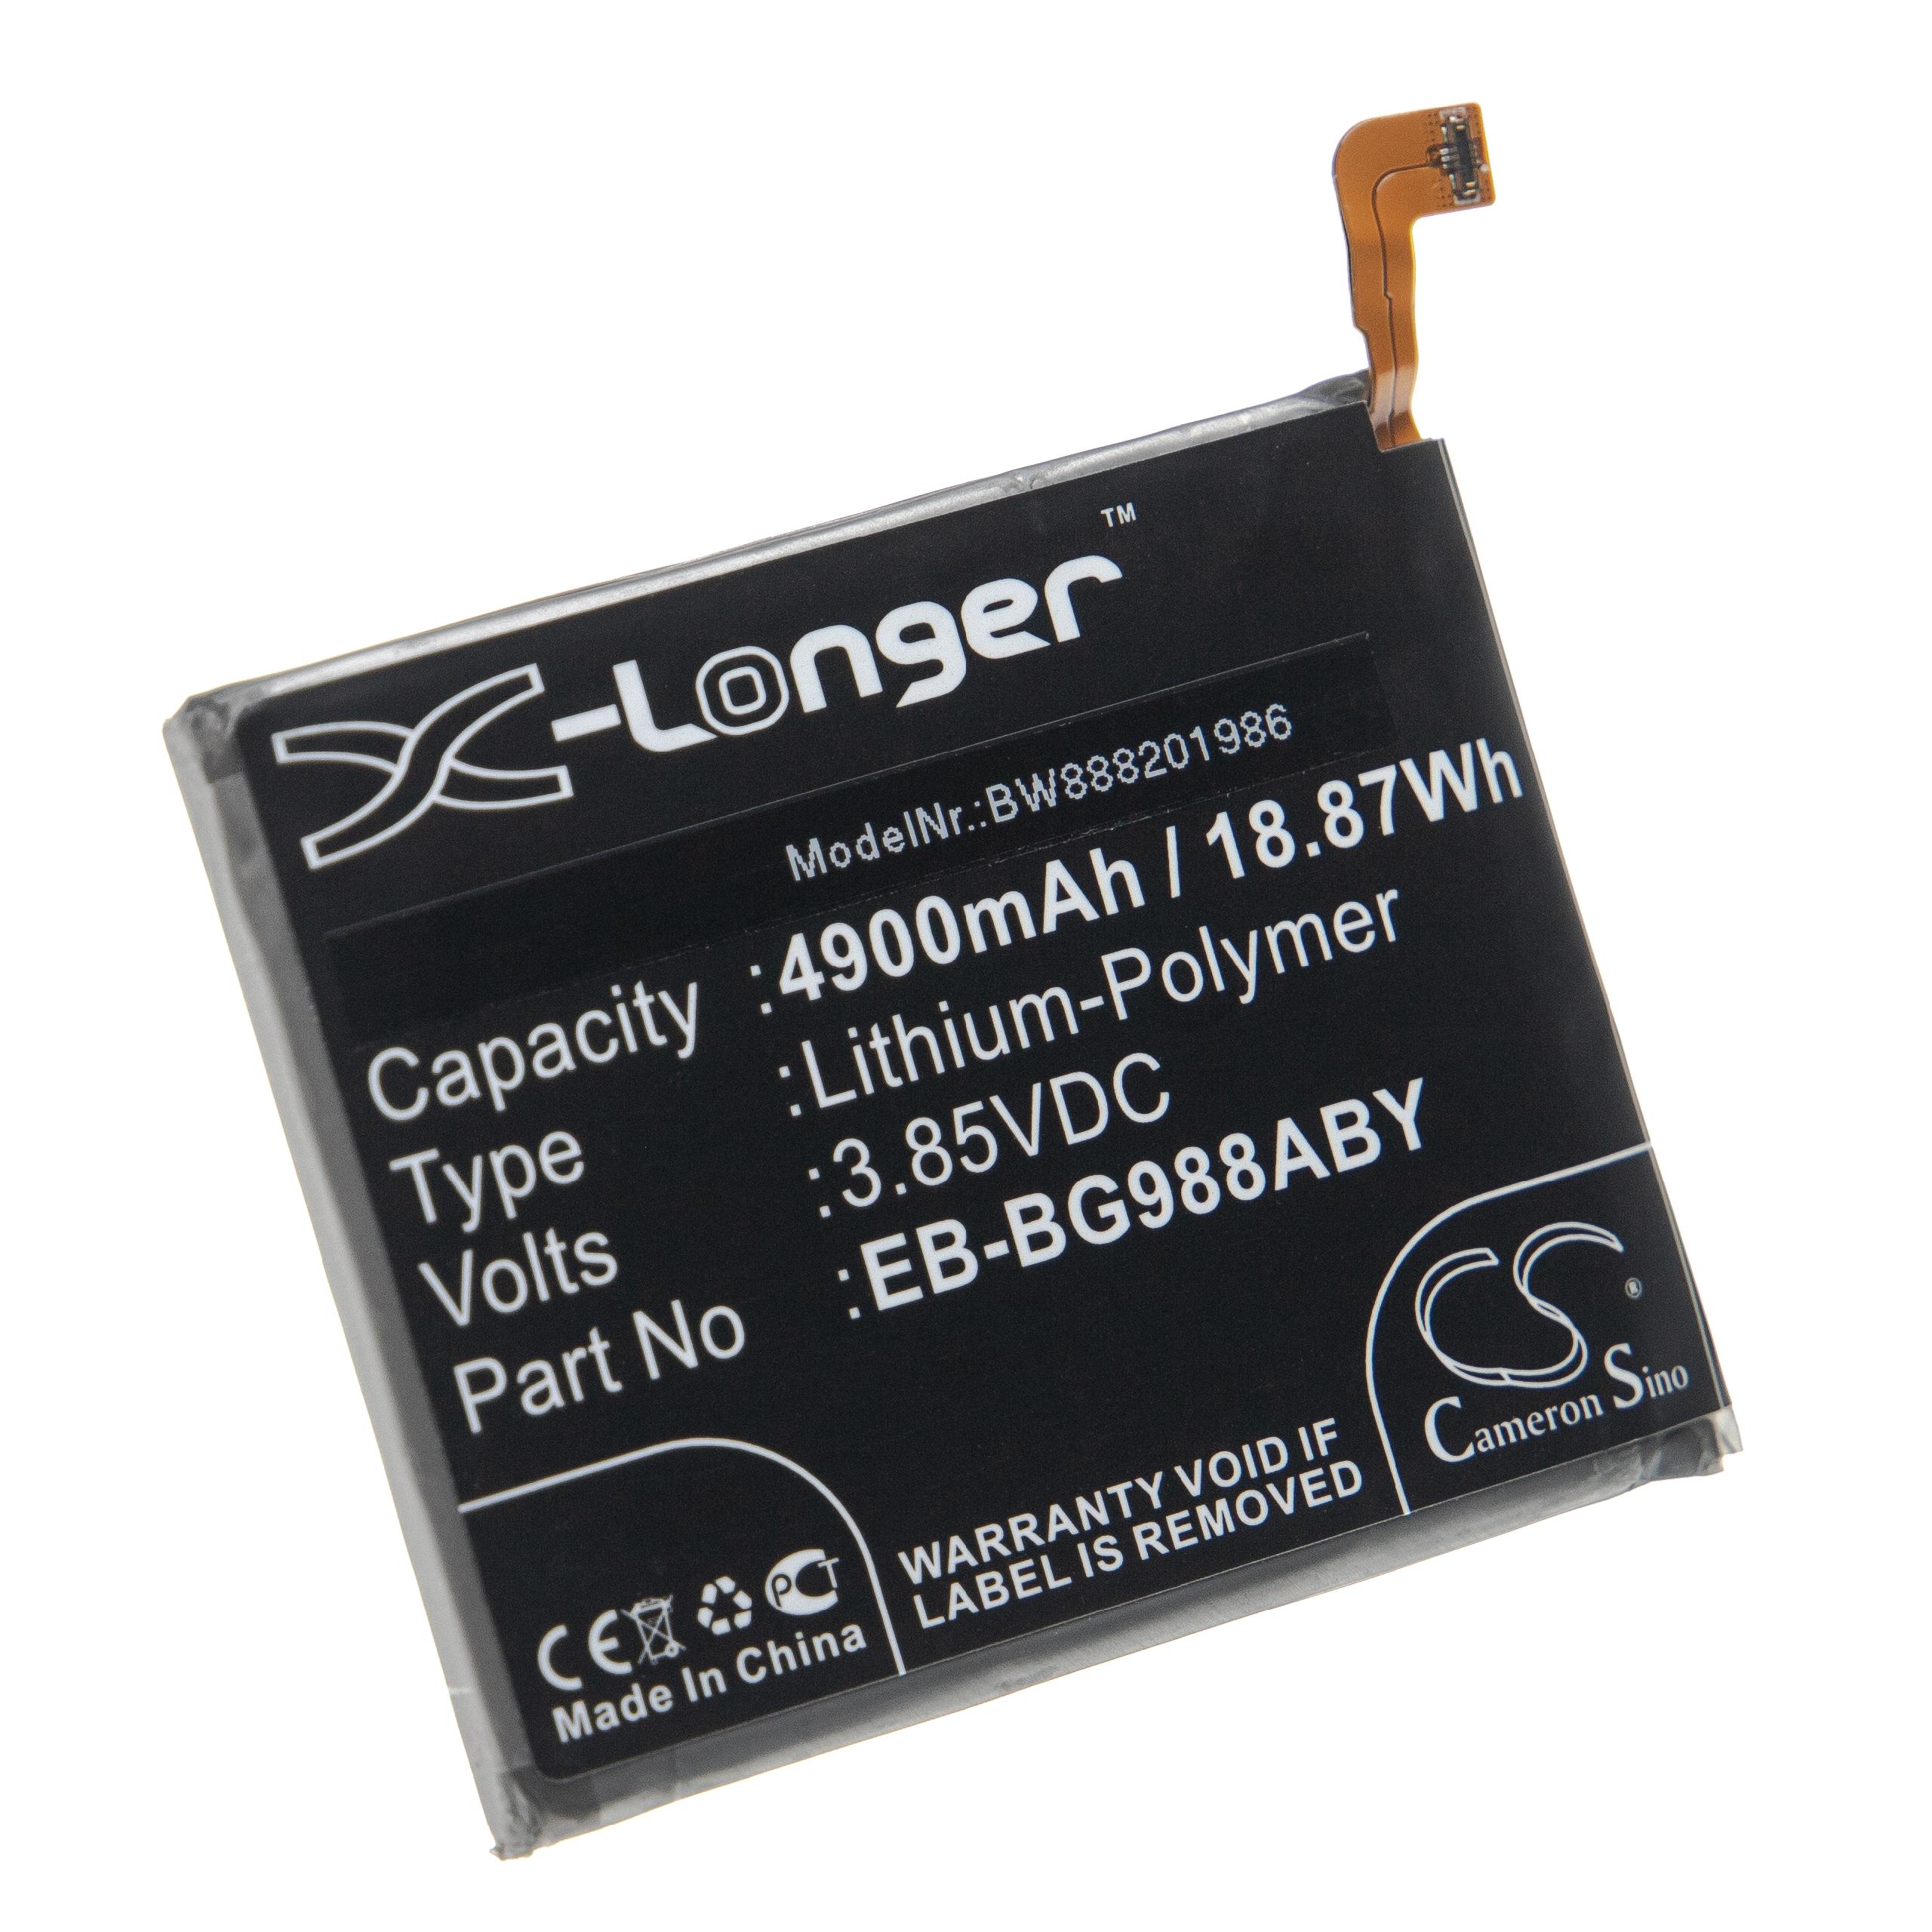 Mobile Phone Battery Replacement for Samsung EB-BG988ABY - 4900mAh 3.85V Li-polymer